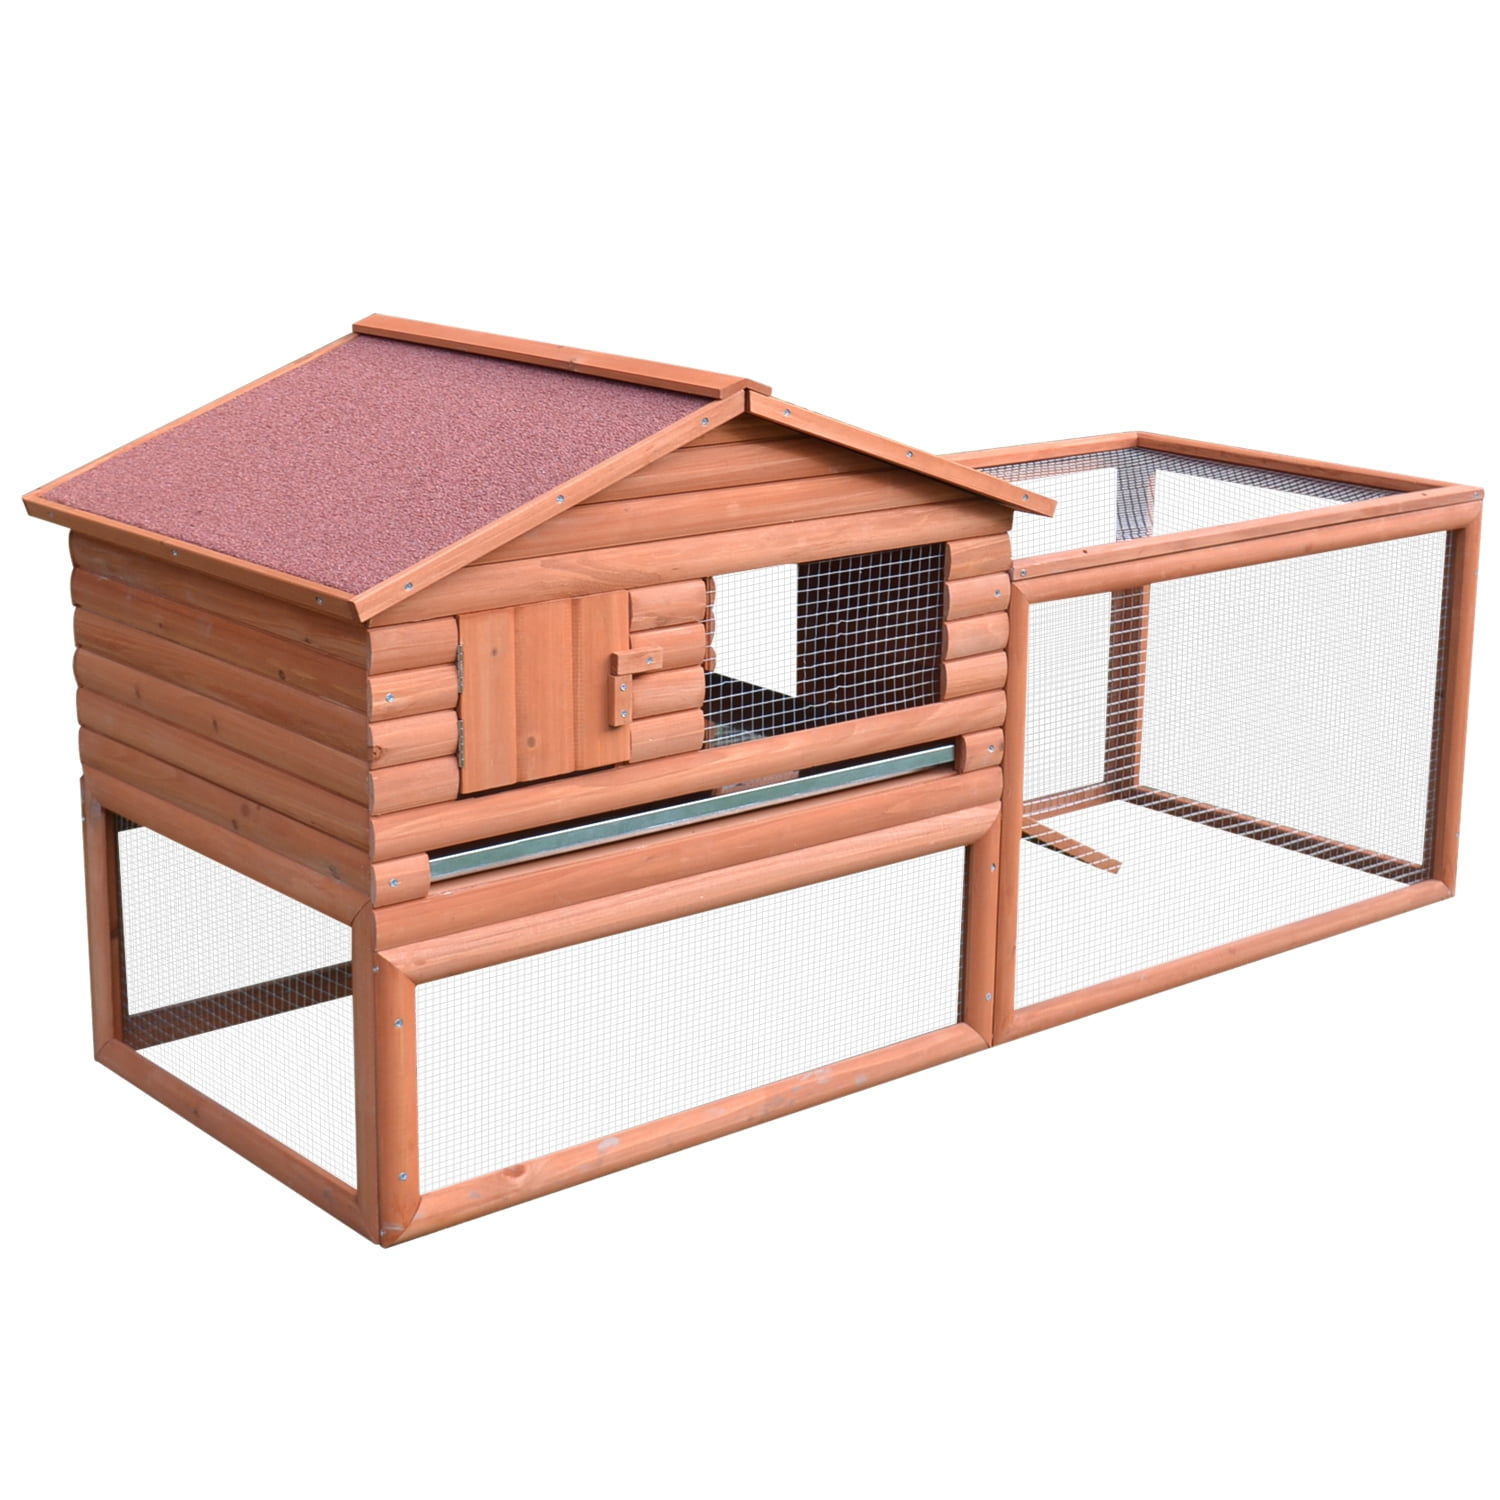 PawHut Wooden Outdoor Rabbit Cage A-Frame Small Animal Hutch Patio Pet House 